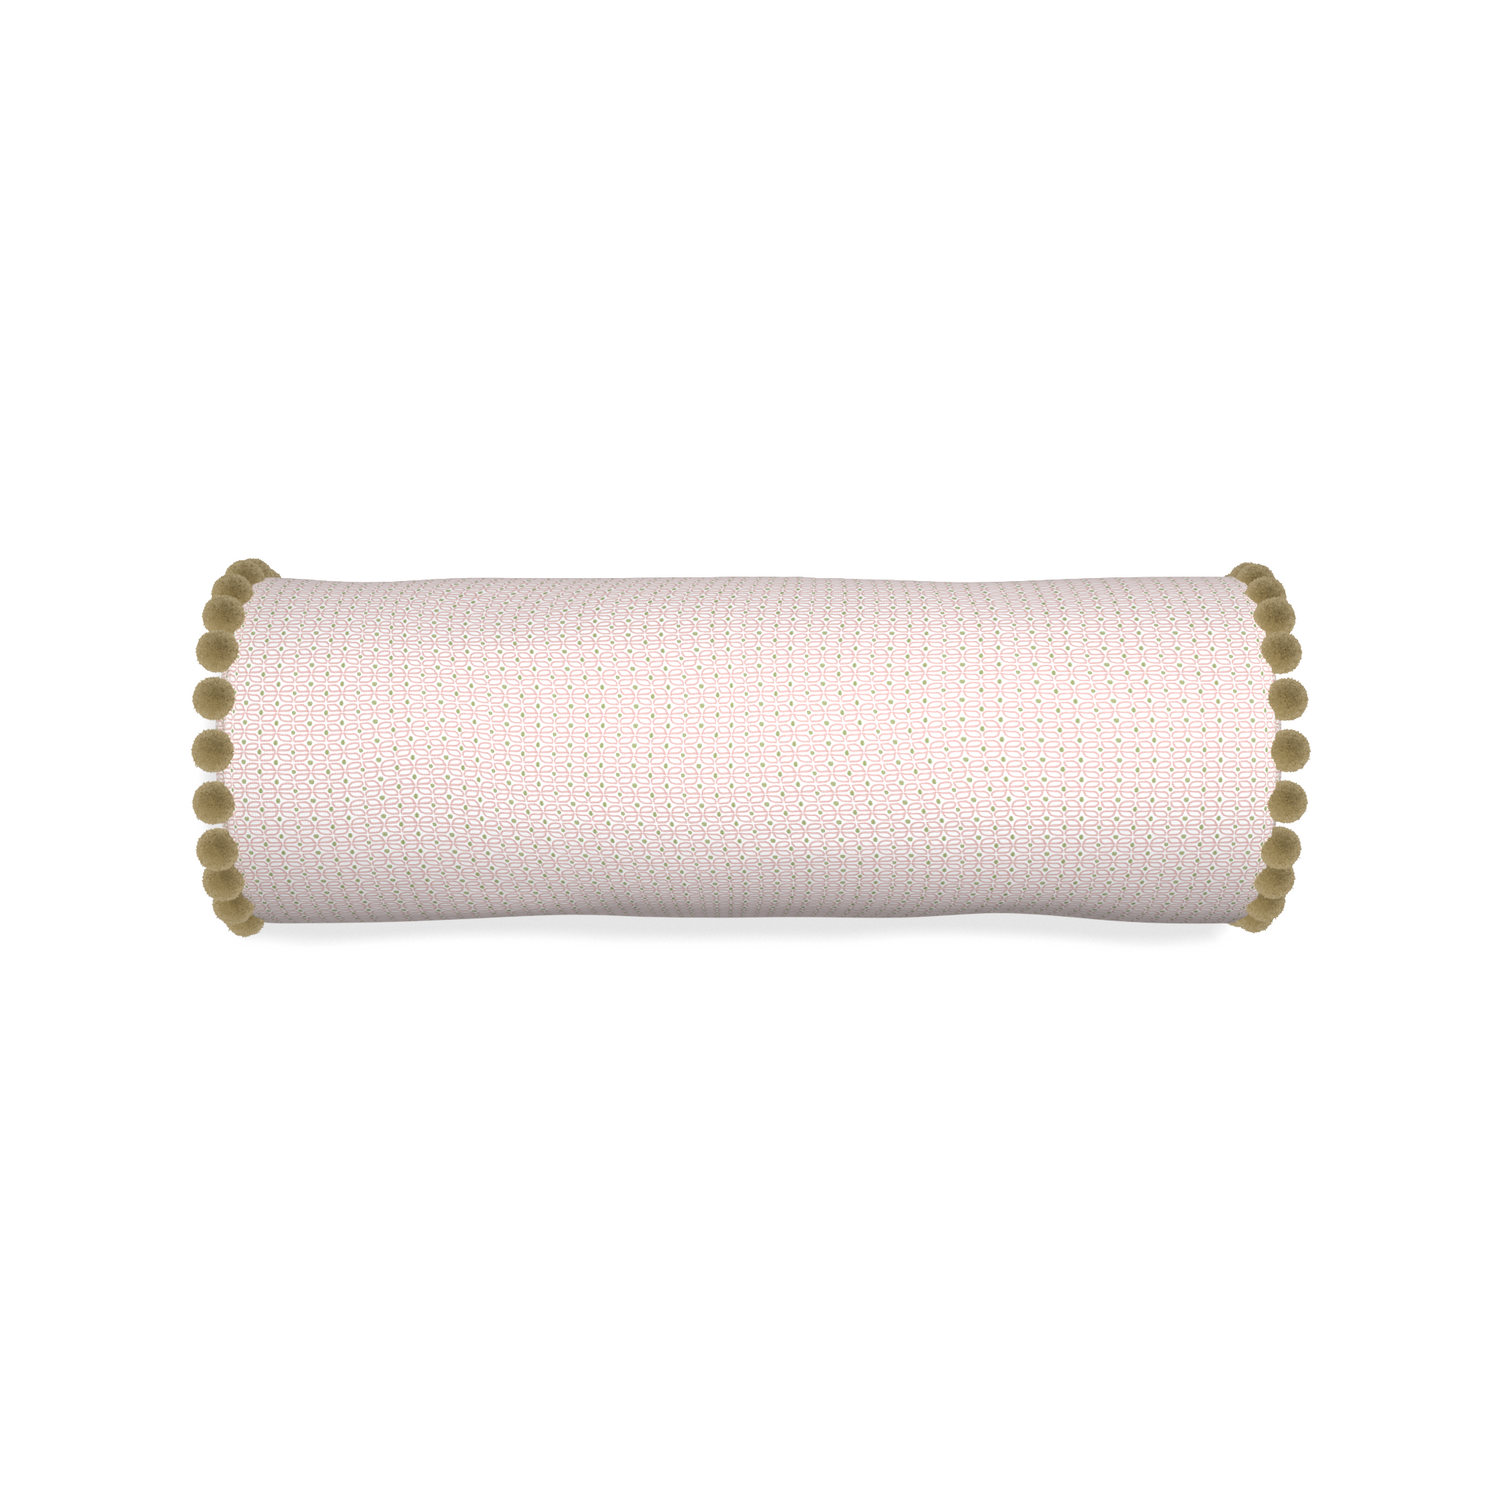 Bolster loomi pink custom pink geometricpillow with olive pom pom on white background